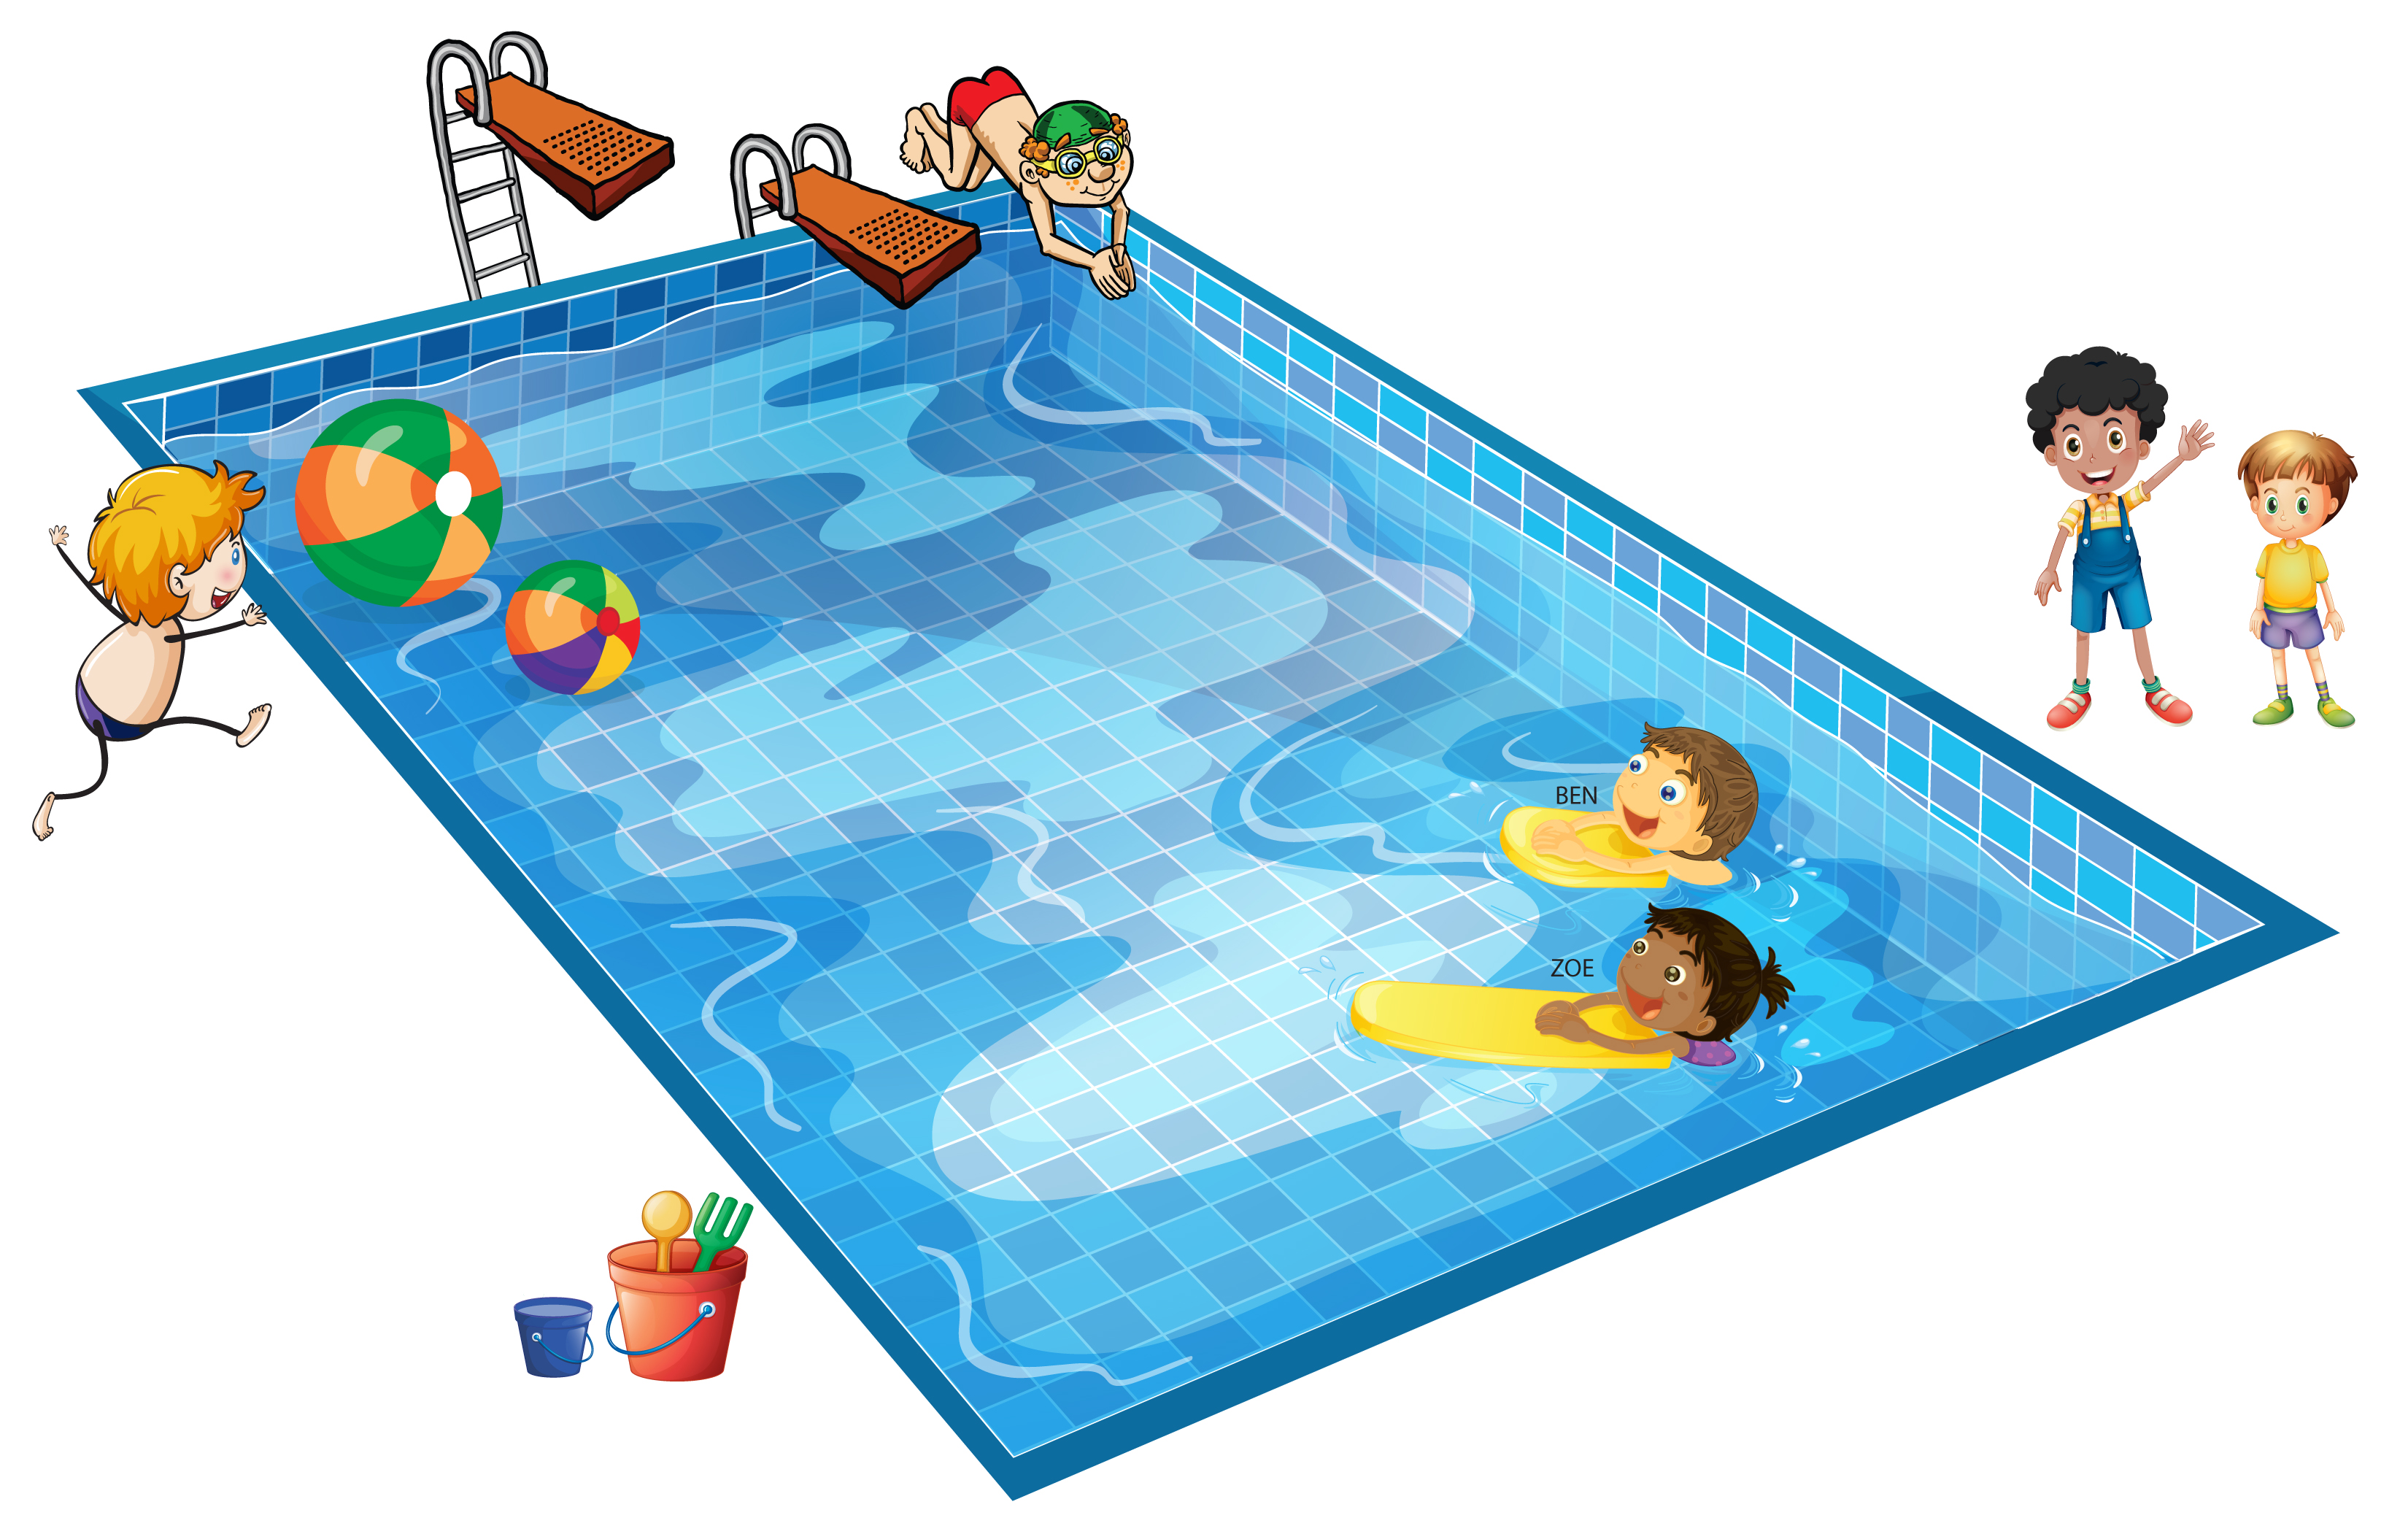 free clipart images swimming pool - photo #10